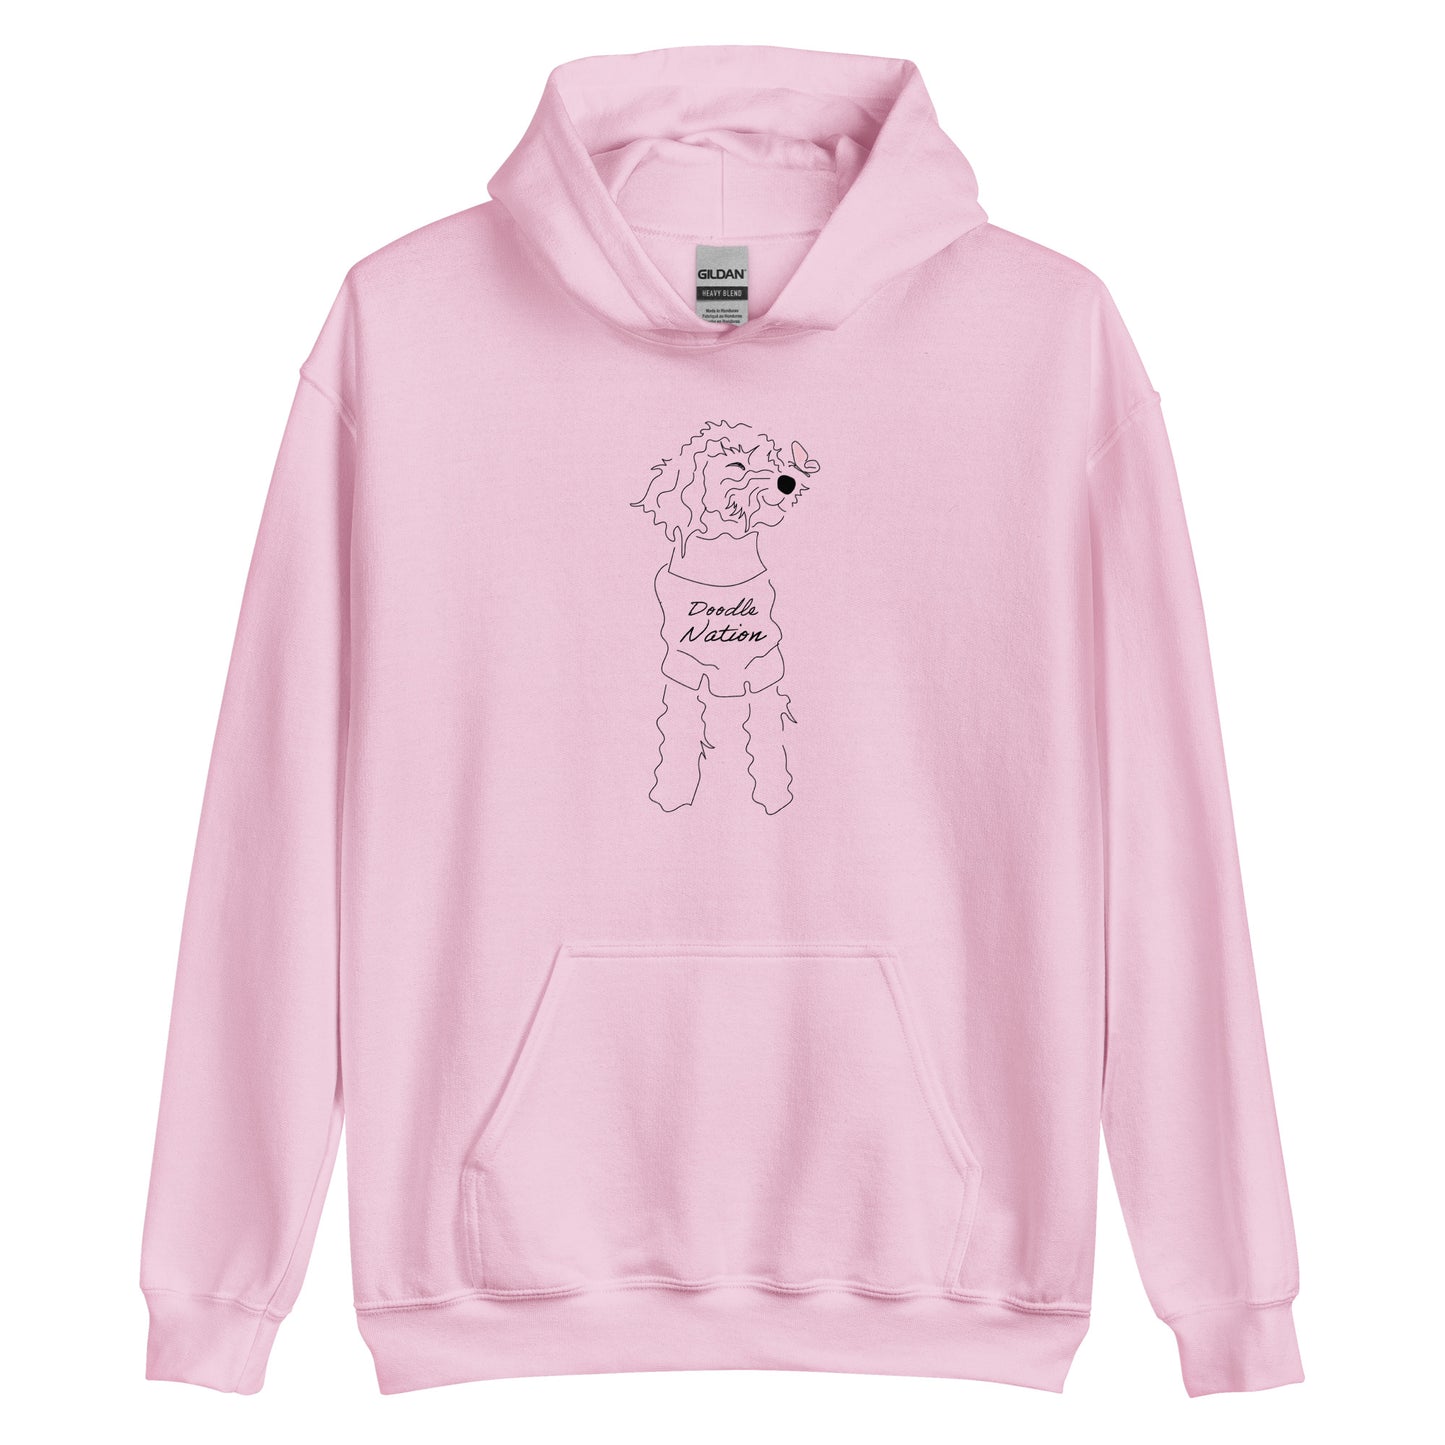 Goldendoodle hoodie with Goldendoodle dog face and words "Doodle Nation" in light pink color